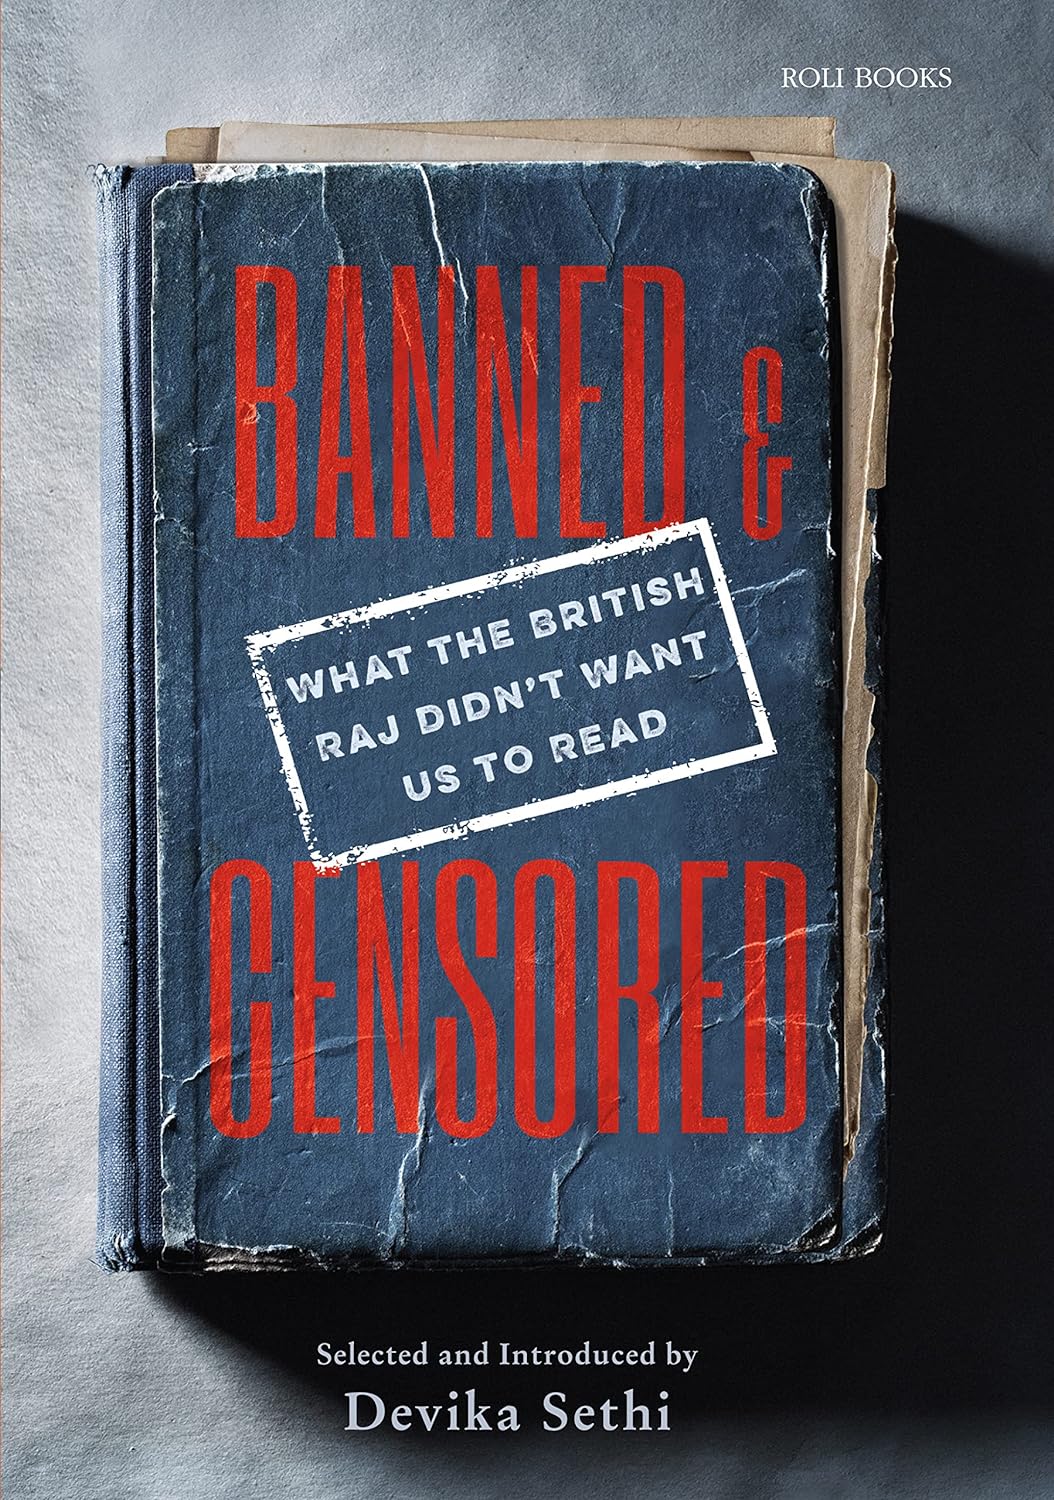 Banned & Censored: What the British Raj Didn’t Want Us to Read